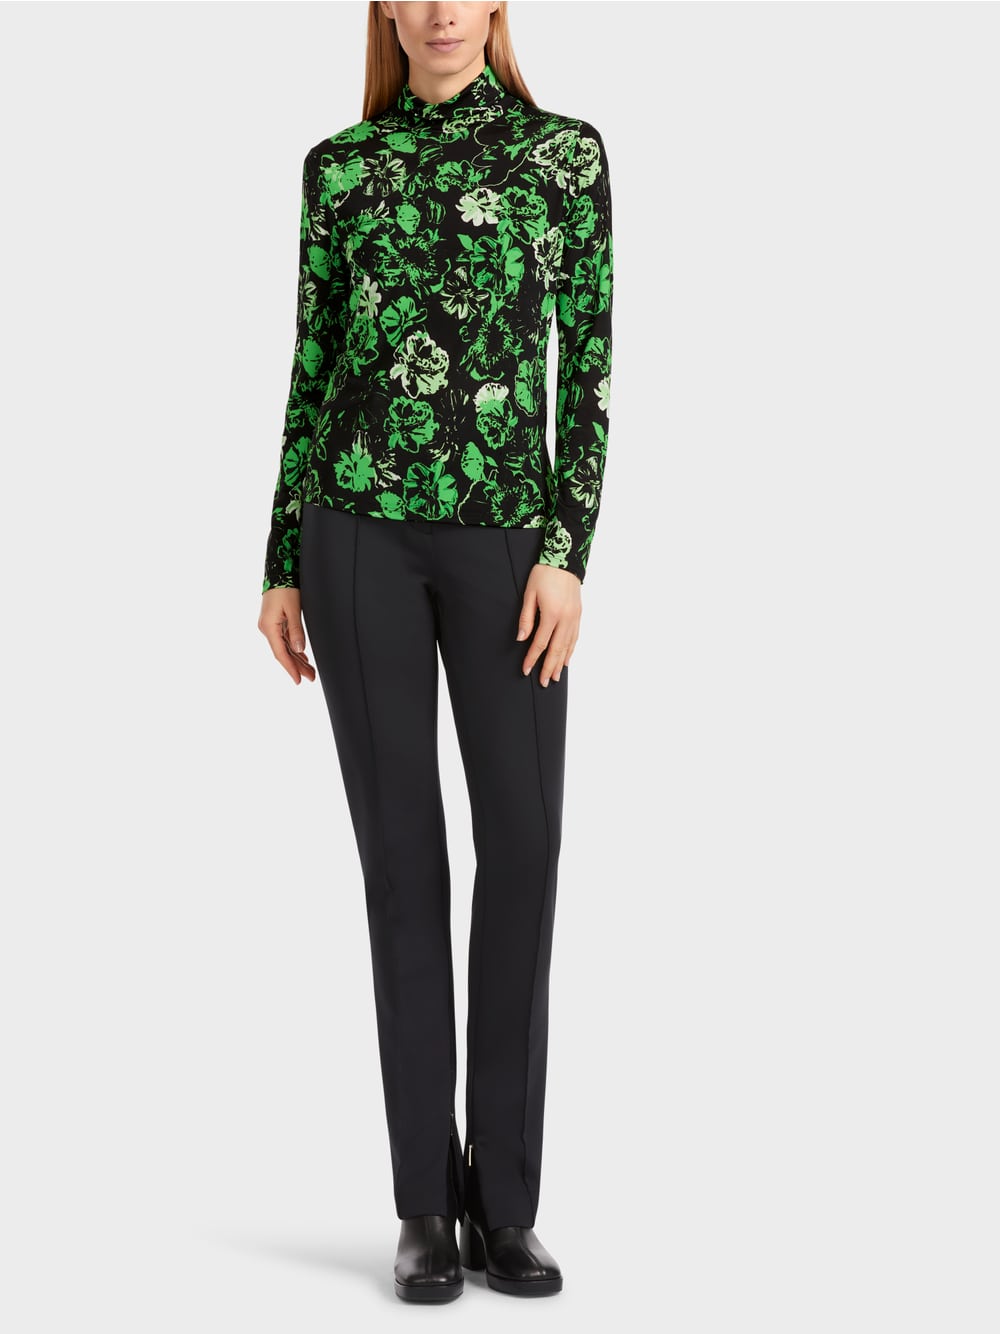 MARC CAIN ROLL NECK T- SHIRT IN FLORAL DESIGN